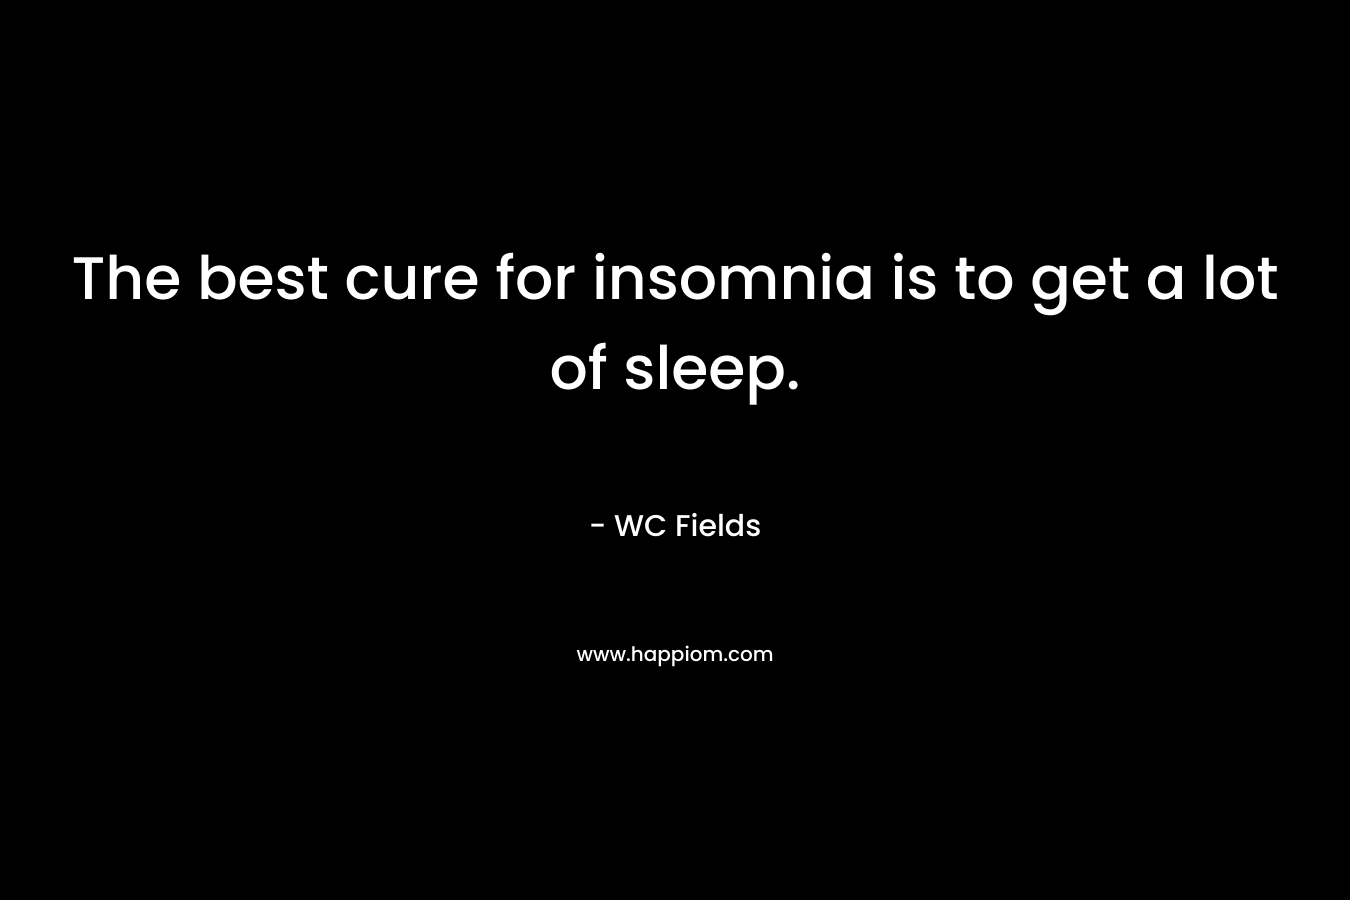 The best cure for insomnia is to get a lot of sleep. – WC Fields